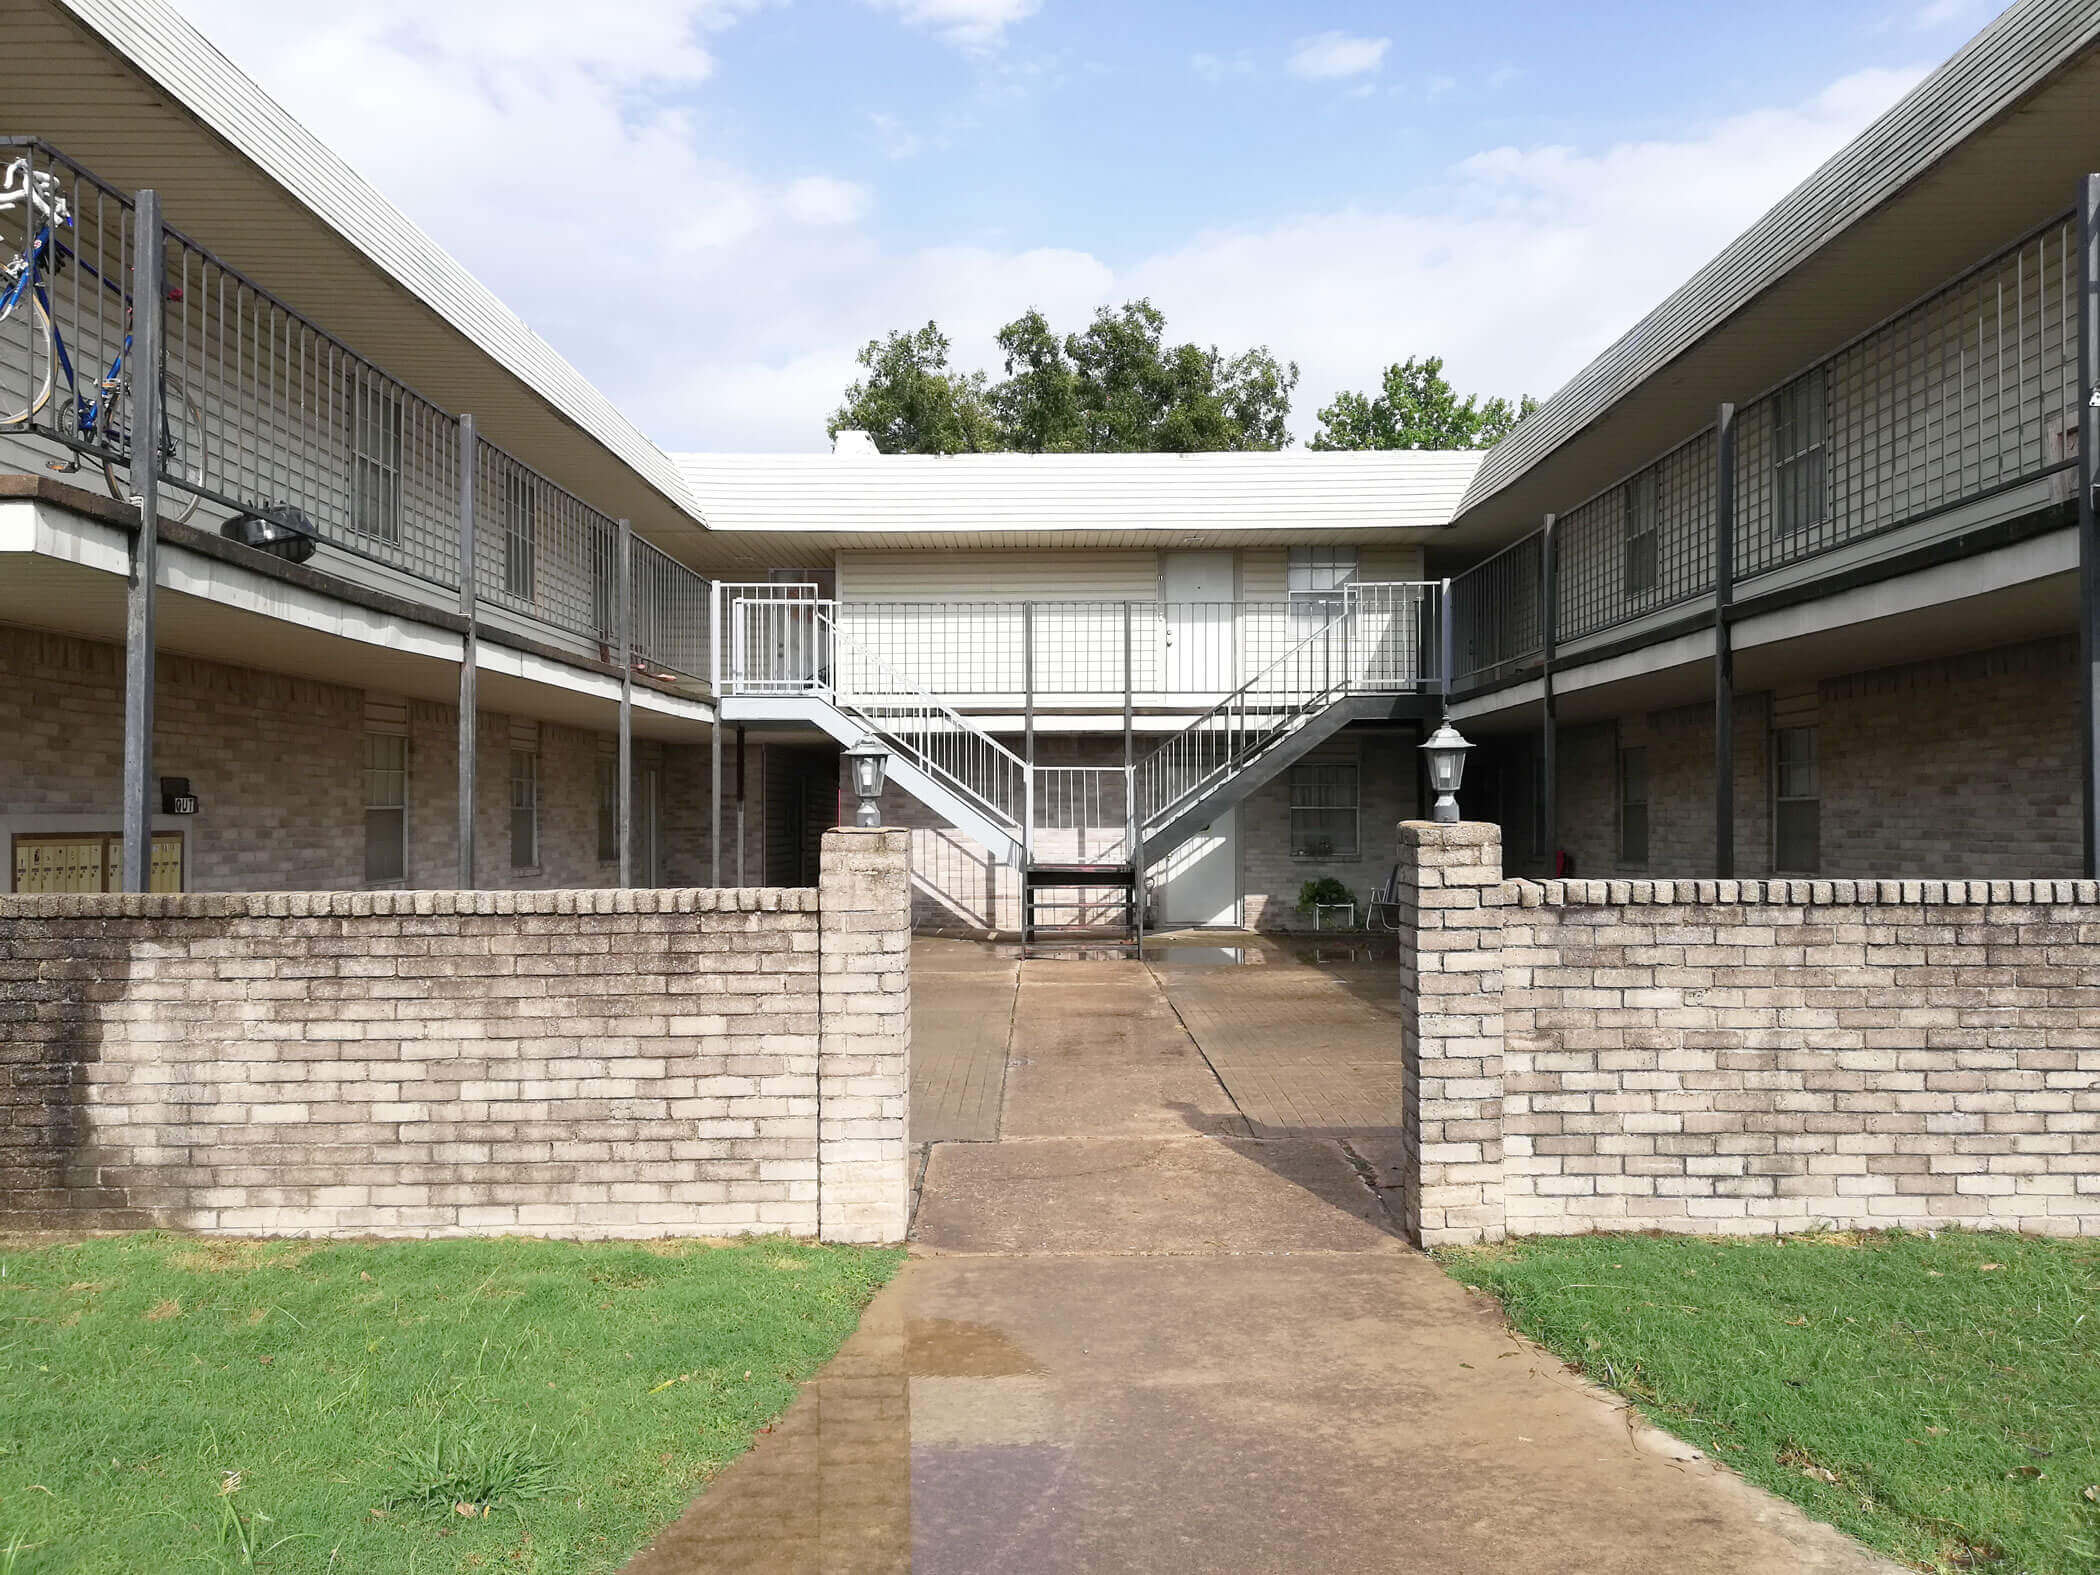 Arbuckle View Apartments